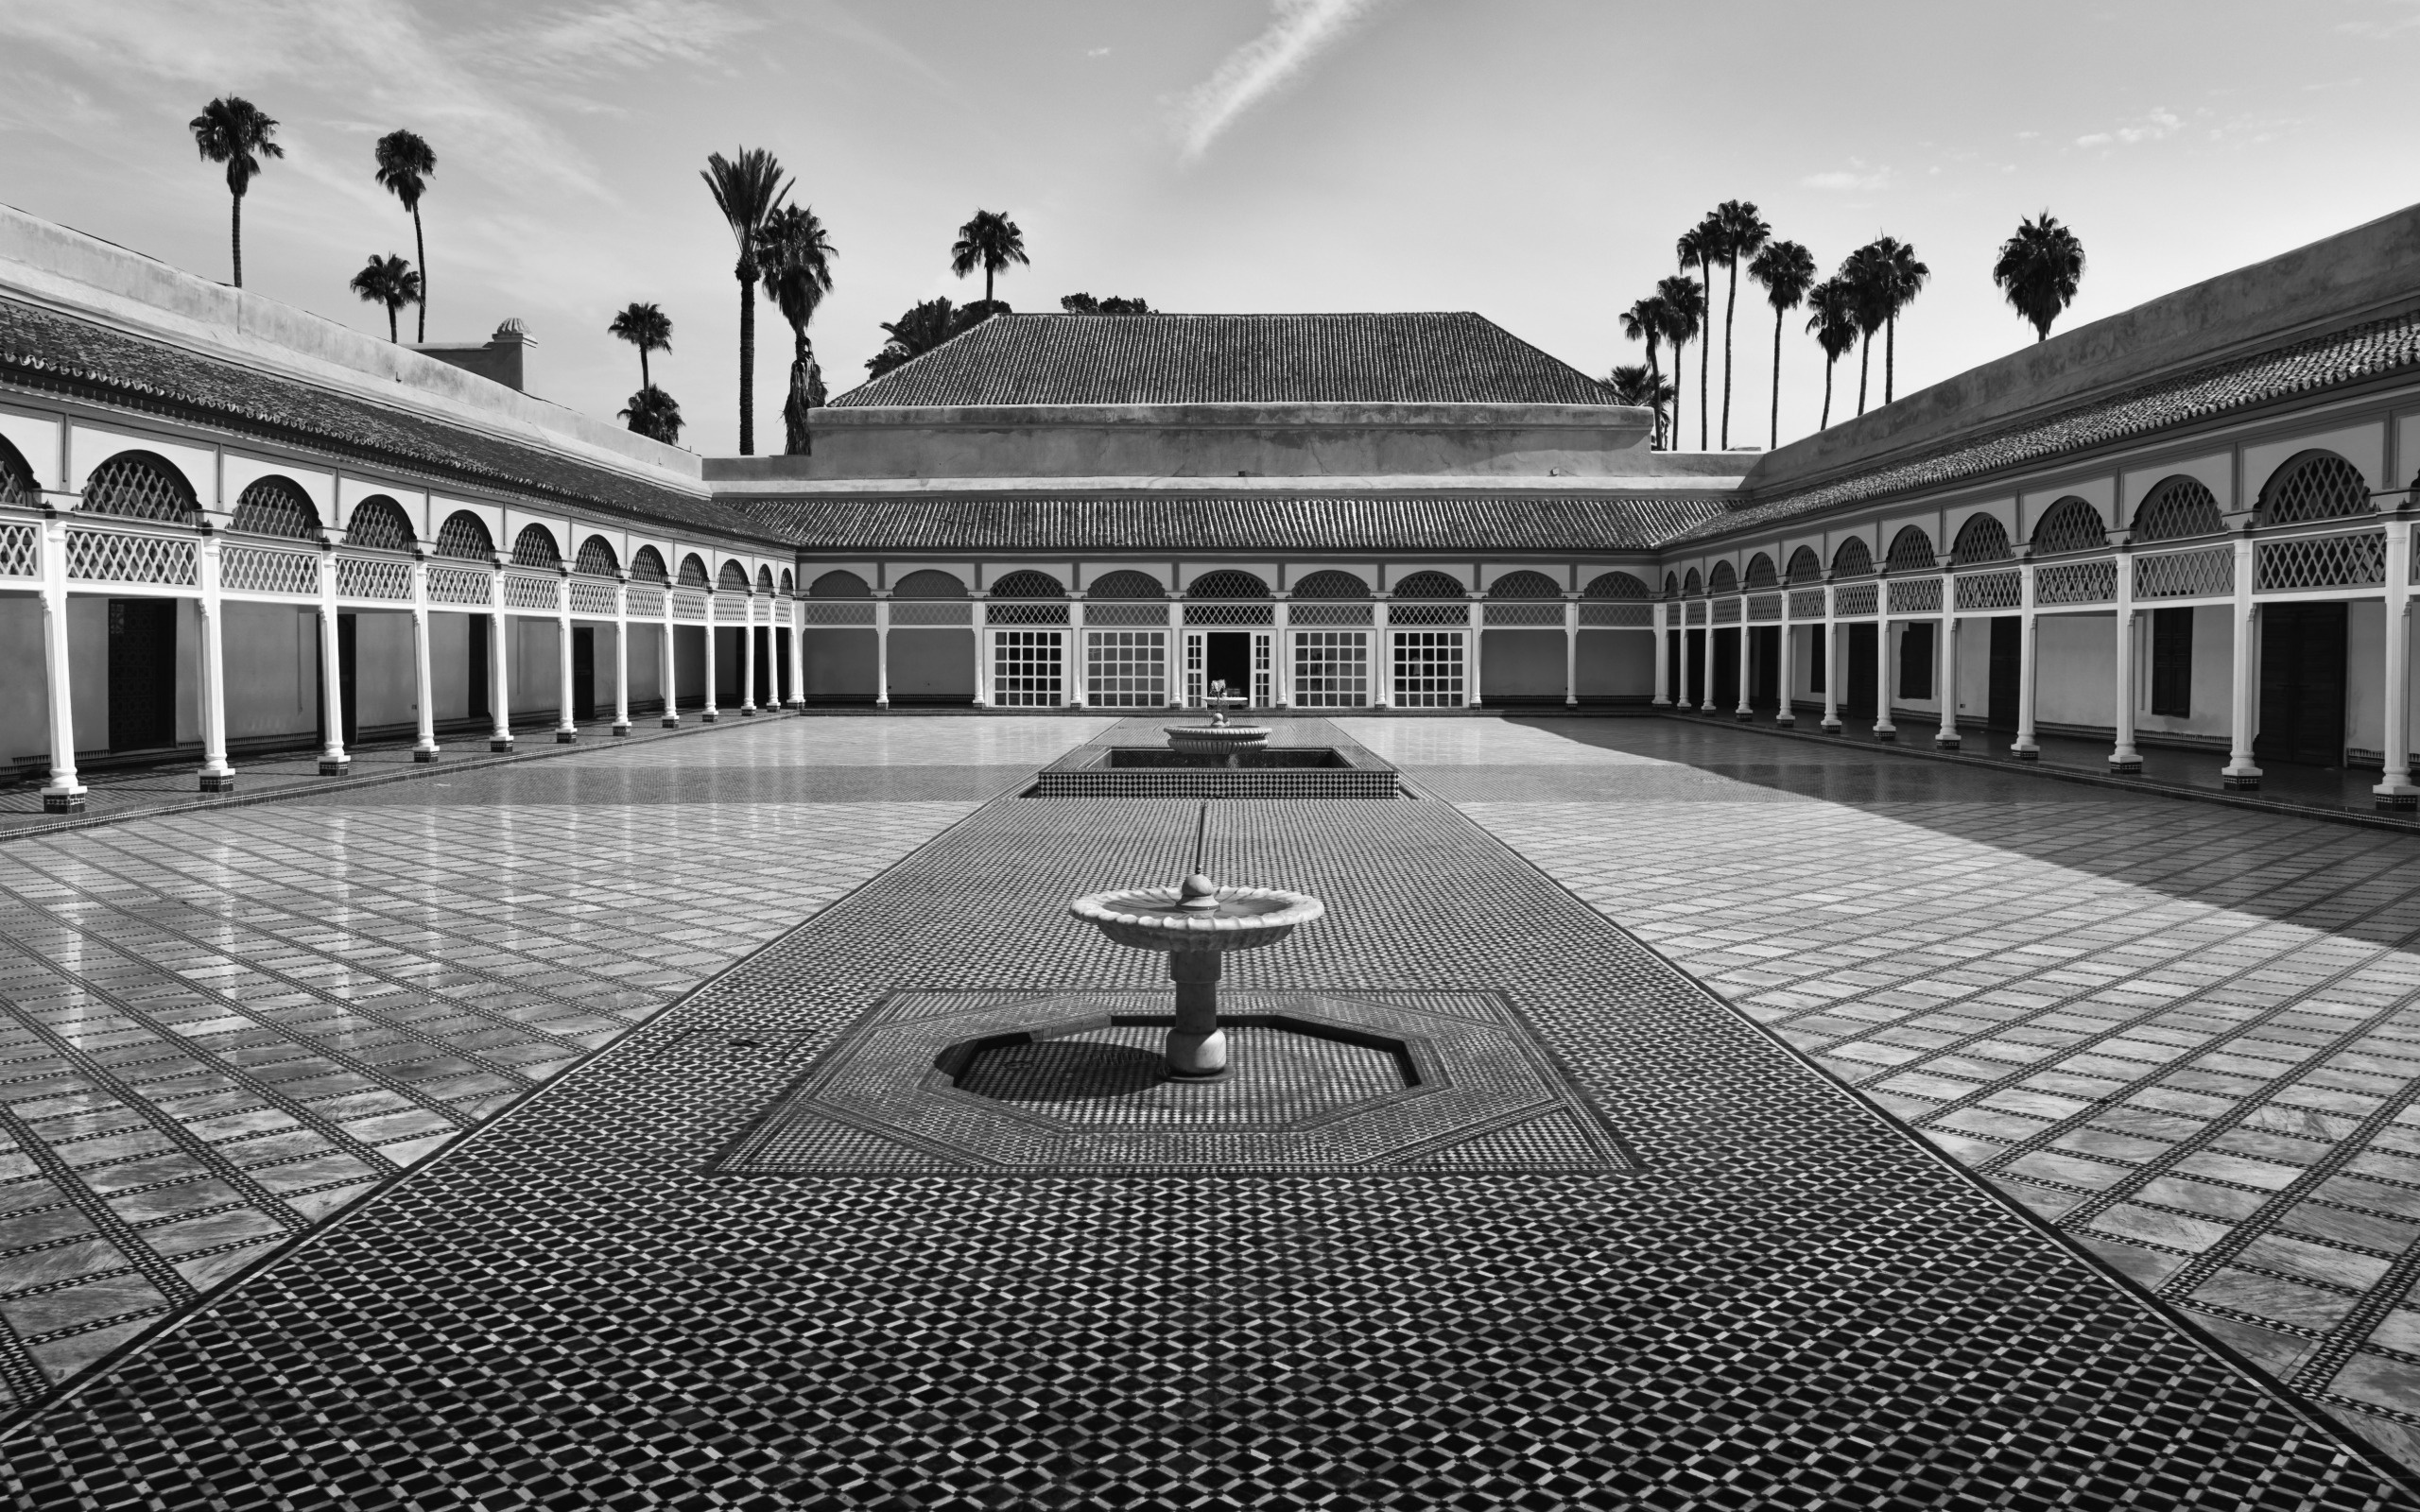 Yard Morocco Marrakech, Bahia Palace section, City in resolution, Exquisite landscape, 2560x1600 HD Desktop